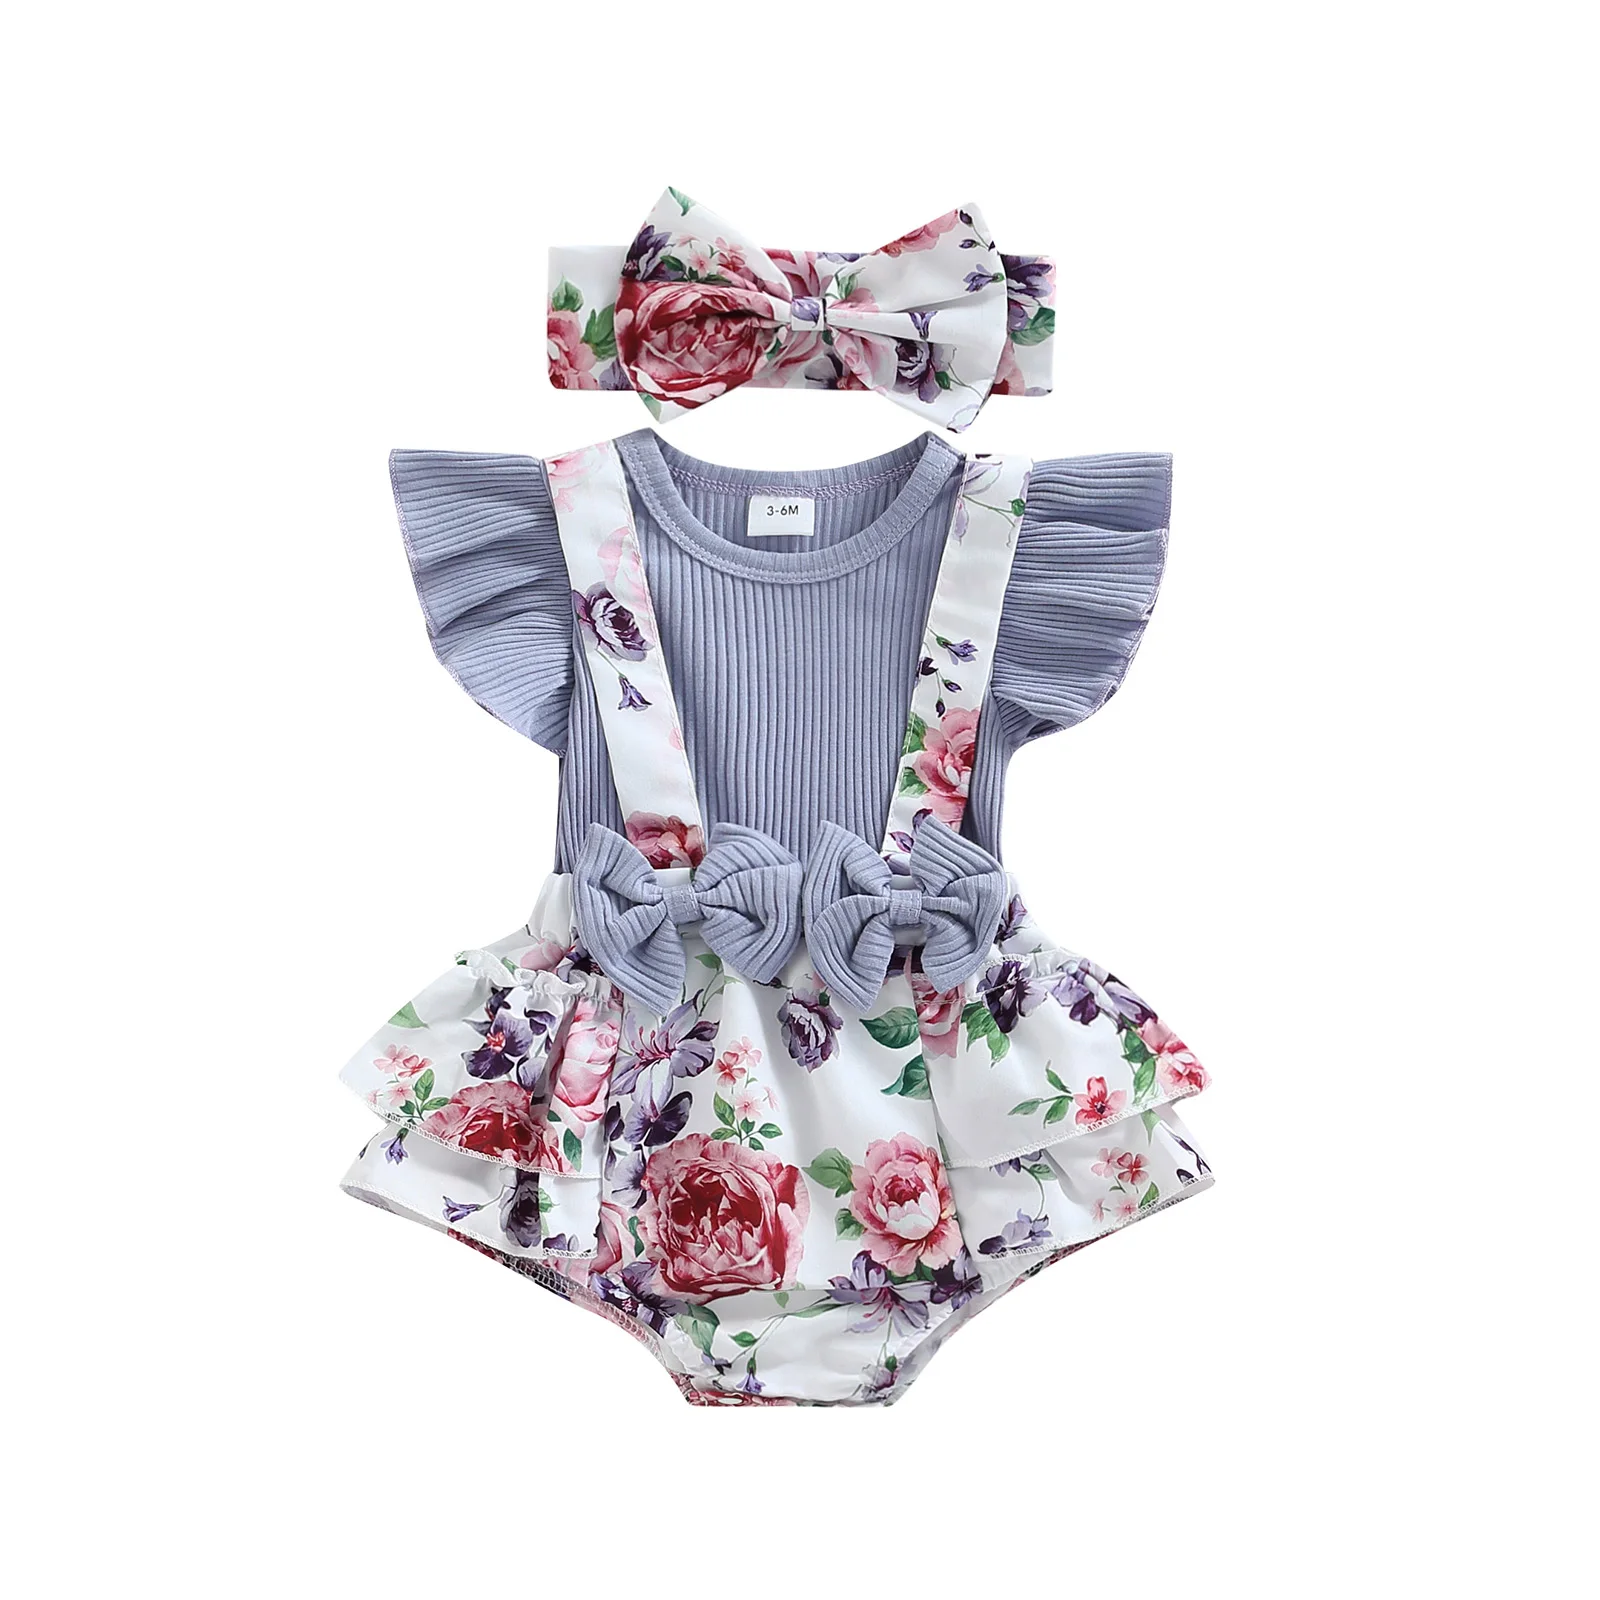 2022-06-02 Lioraitiin 0-18M Baby Girl's Bodysuit Ruffle Sleeve Bowknot Decorated Floral Printed Patchwork Bodysuit Headband